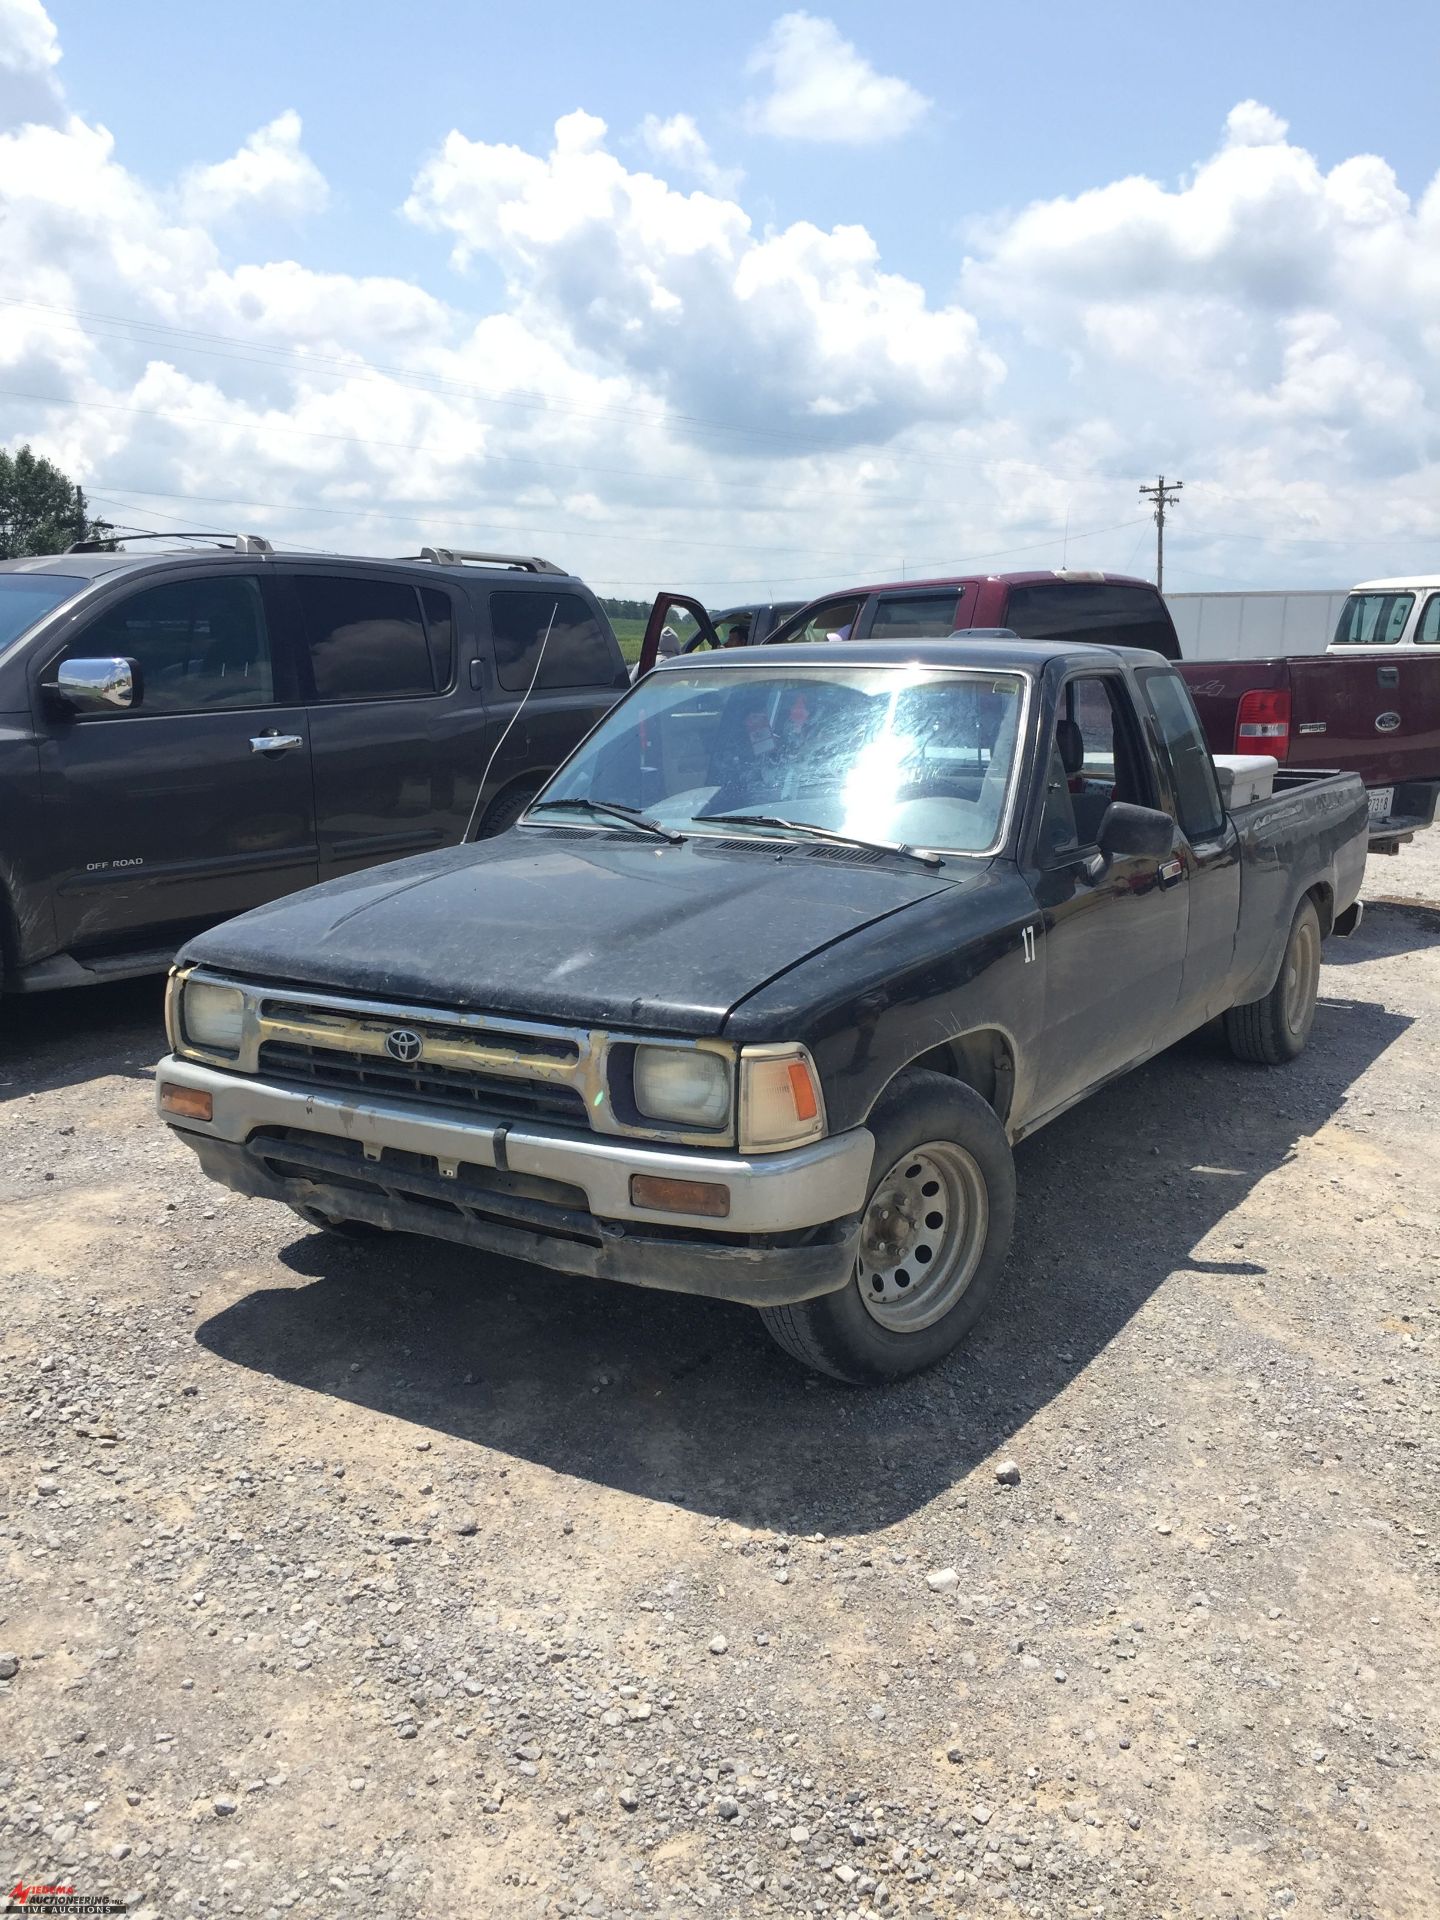 1994 TOYOTA EXTENDED CAB PICKUP TRUCK, LONG BOX, 4-CYLINDER GAS ENGINE, AUTOMATIC TRANS, ASSORTED